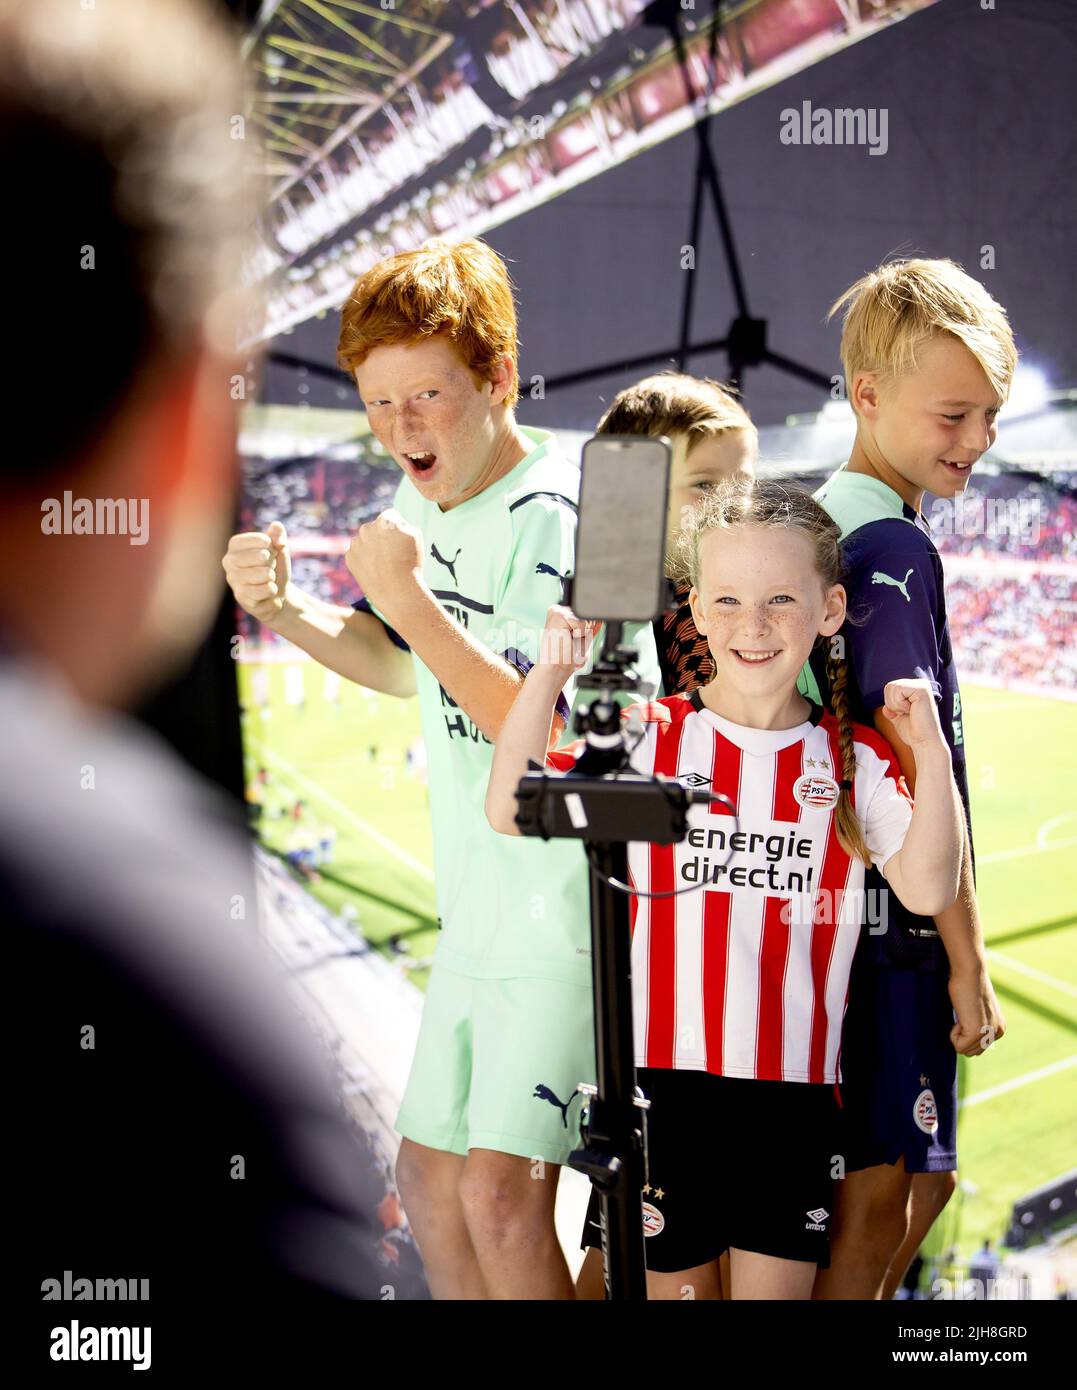 EINDHOVEN - PSV supporters during the annual PSV Fan Day at the Philips Stadium. After two years, the event can continue for fans. There is, among other things, a Walk of Fame where famous PSV players are assigned a place during the tile ceremony. KOEN VAN WEEL Stock Photo